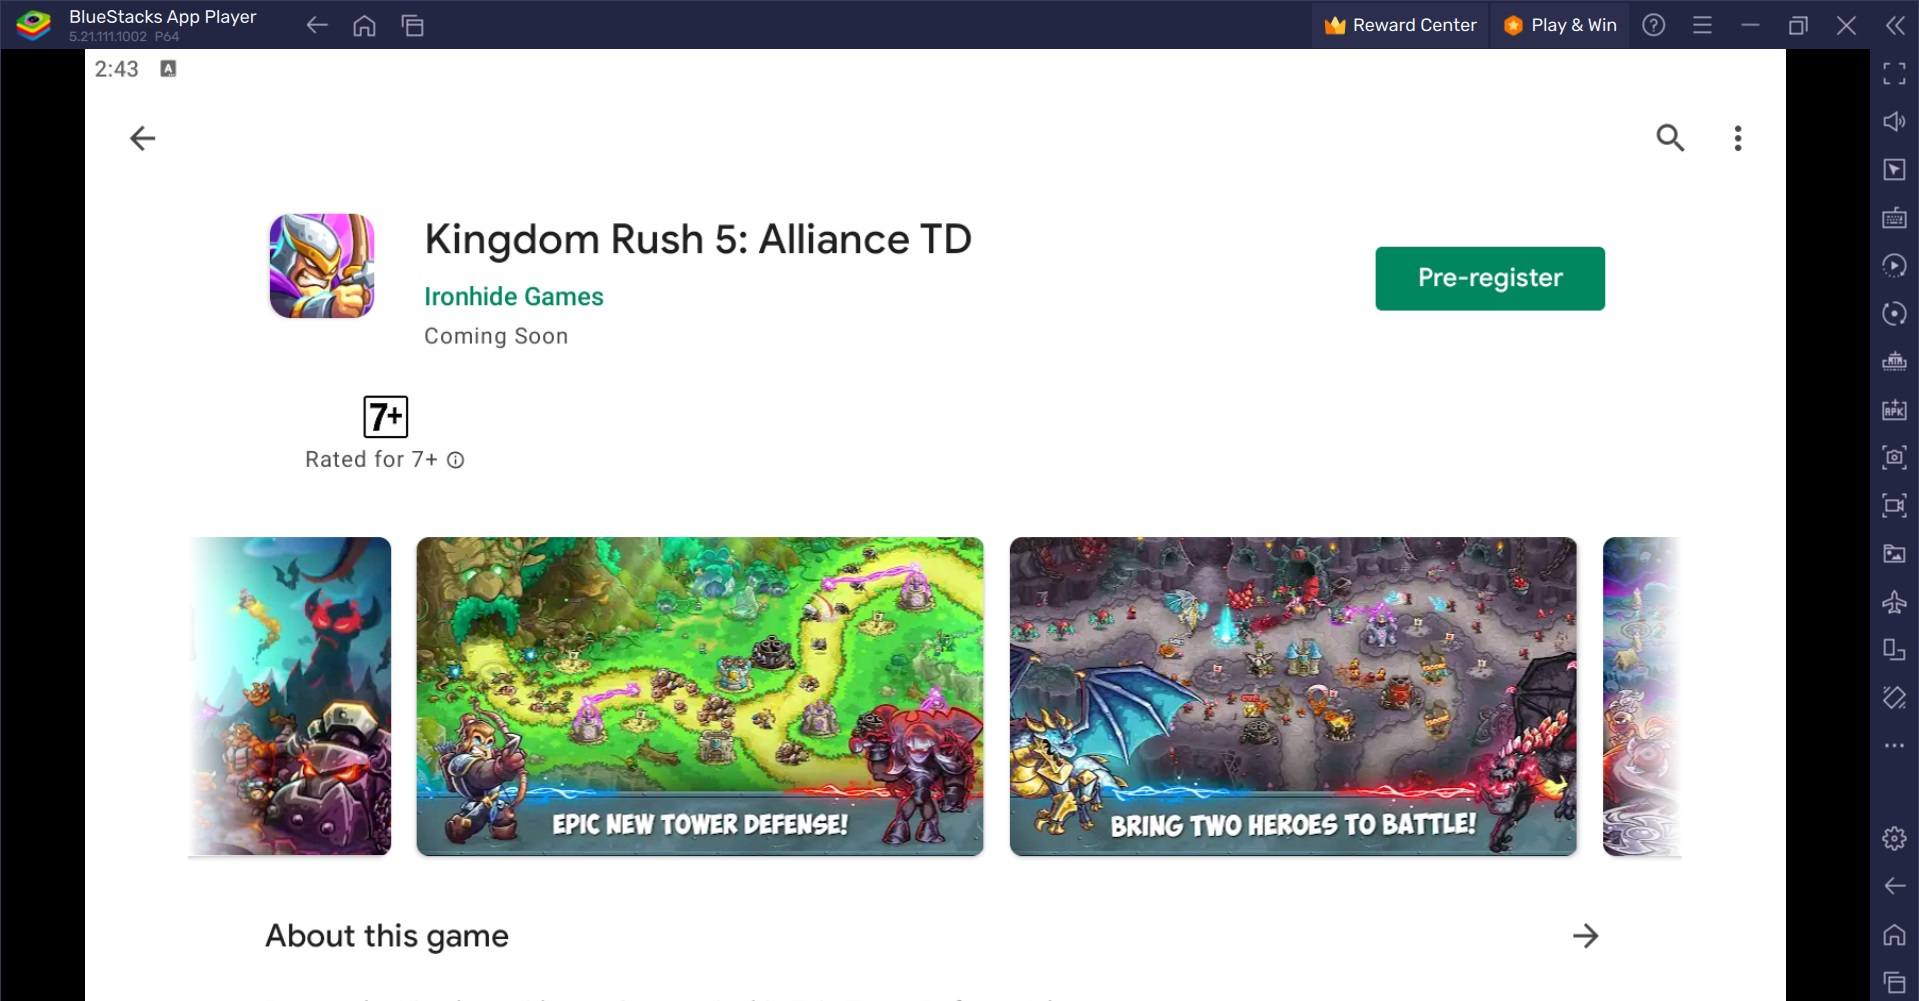 How to Play Kingdom Rush 5: Alliance TD on PC with BlueStacks